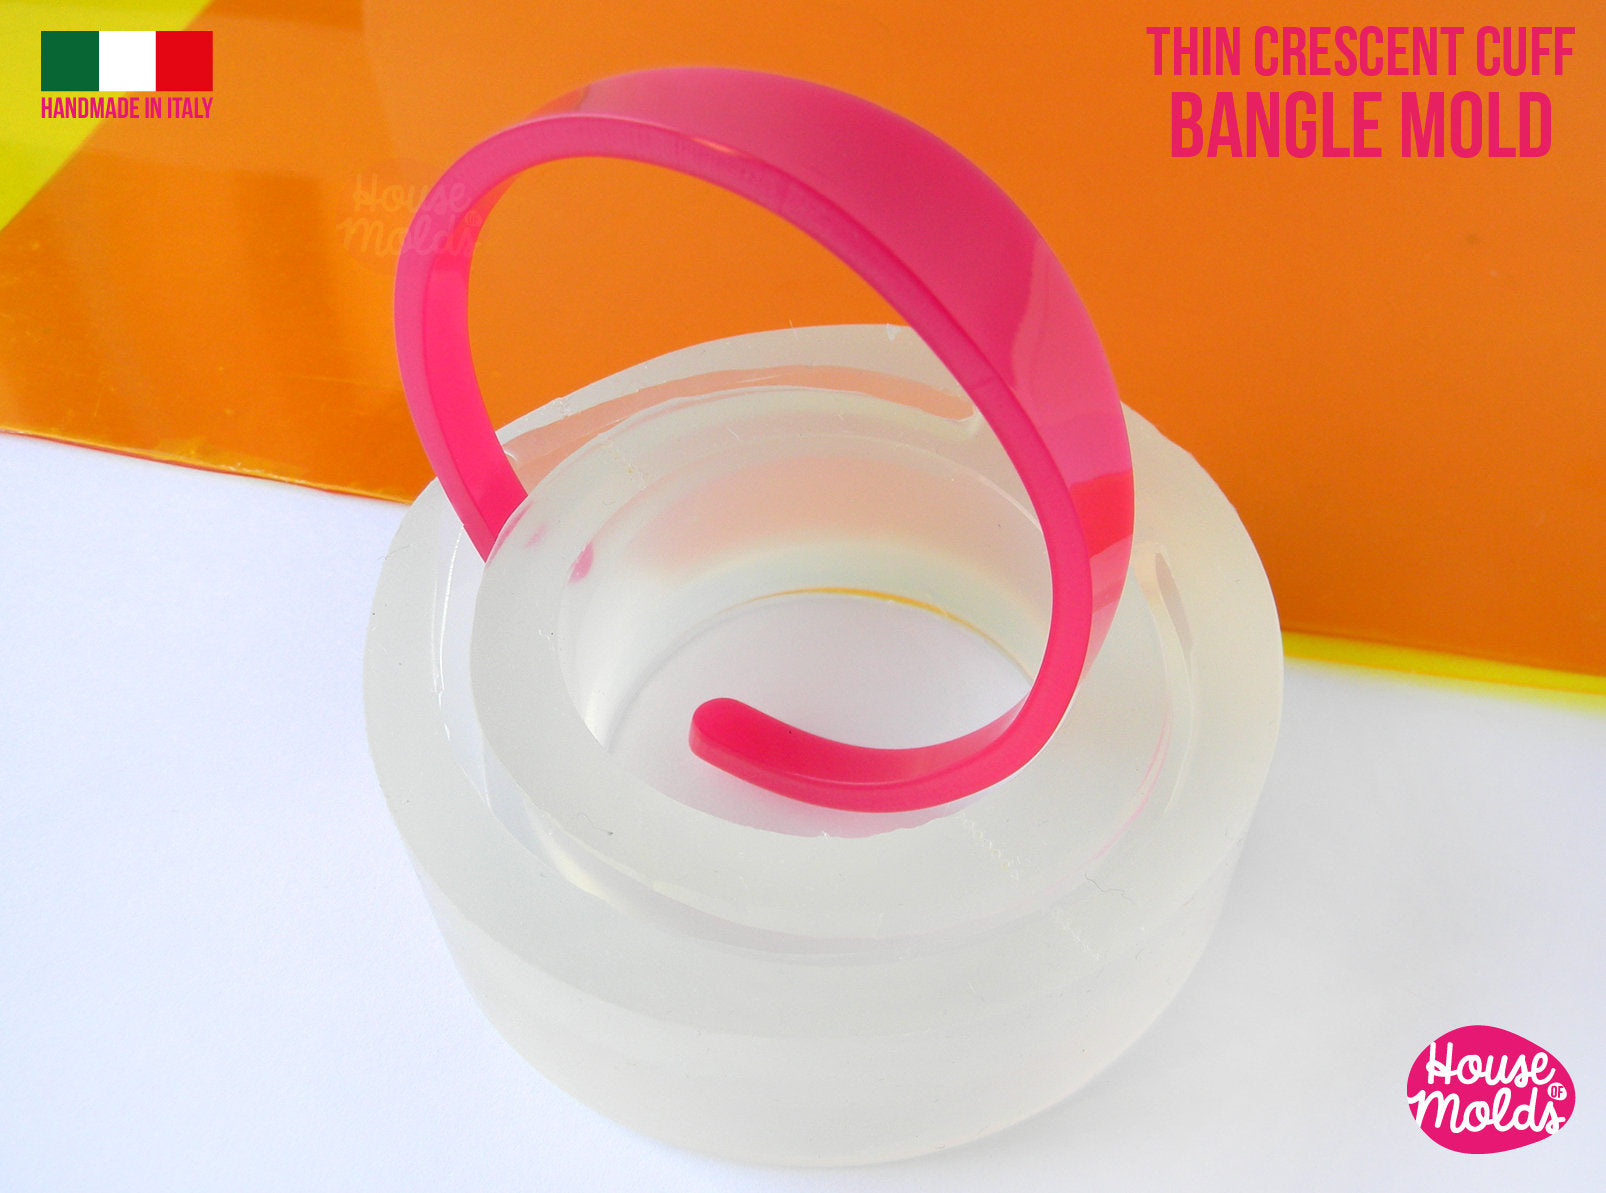 Bangle Silicone Round Mold 2.5 - The Compleat Sculptor